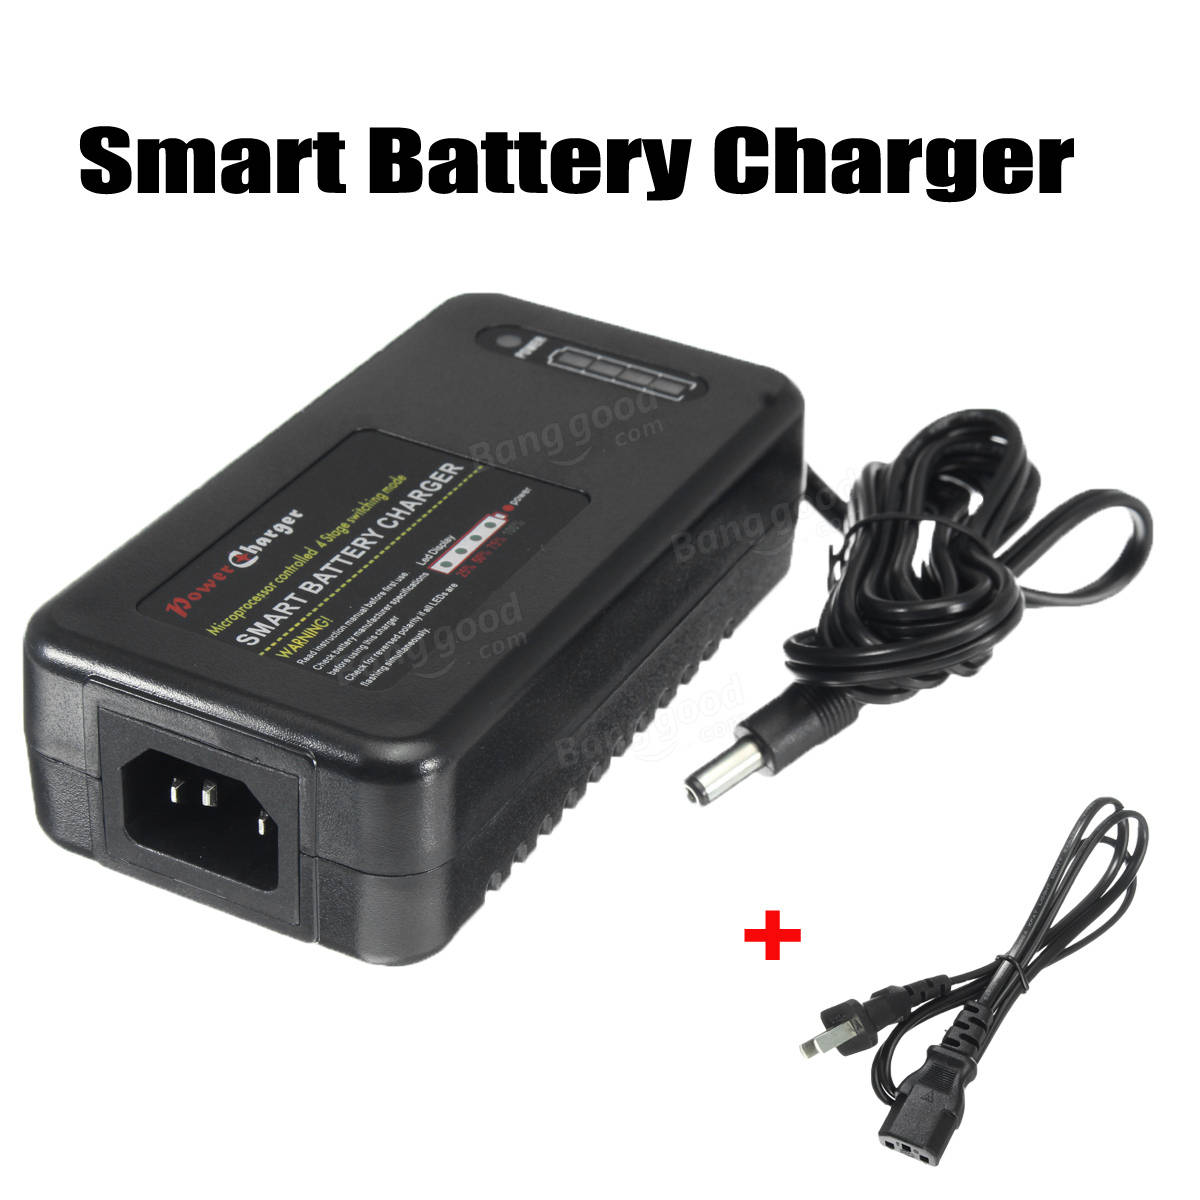 Smart Battery Charger. Lithium Battery Charger. Lithium Battery Char ler. Lithium Battery Charger 2s Type c.